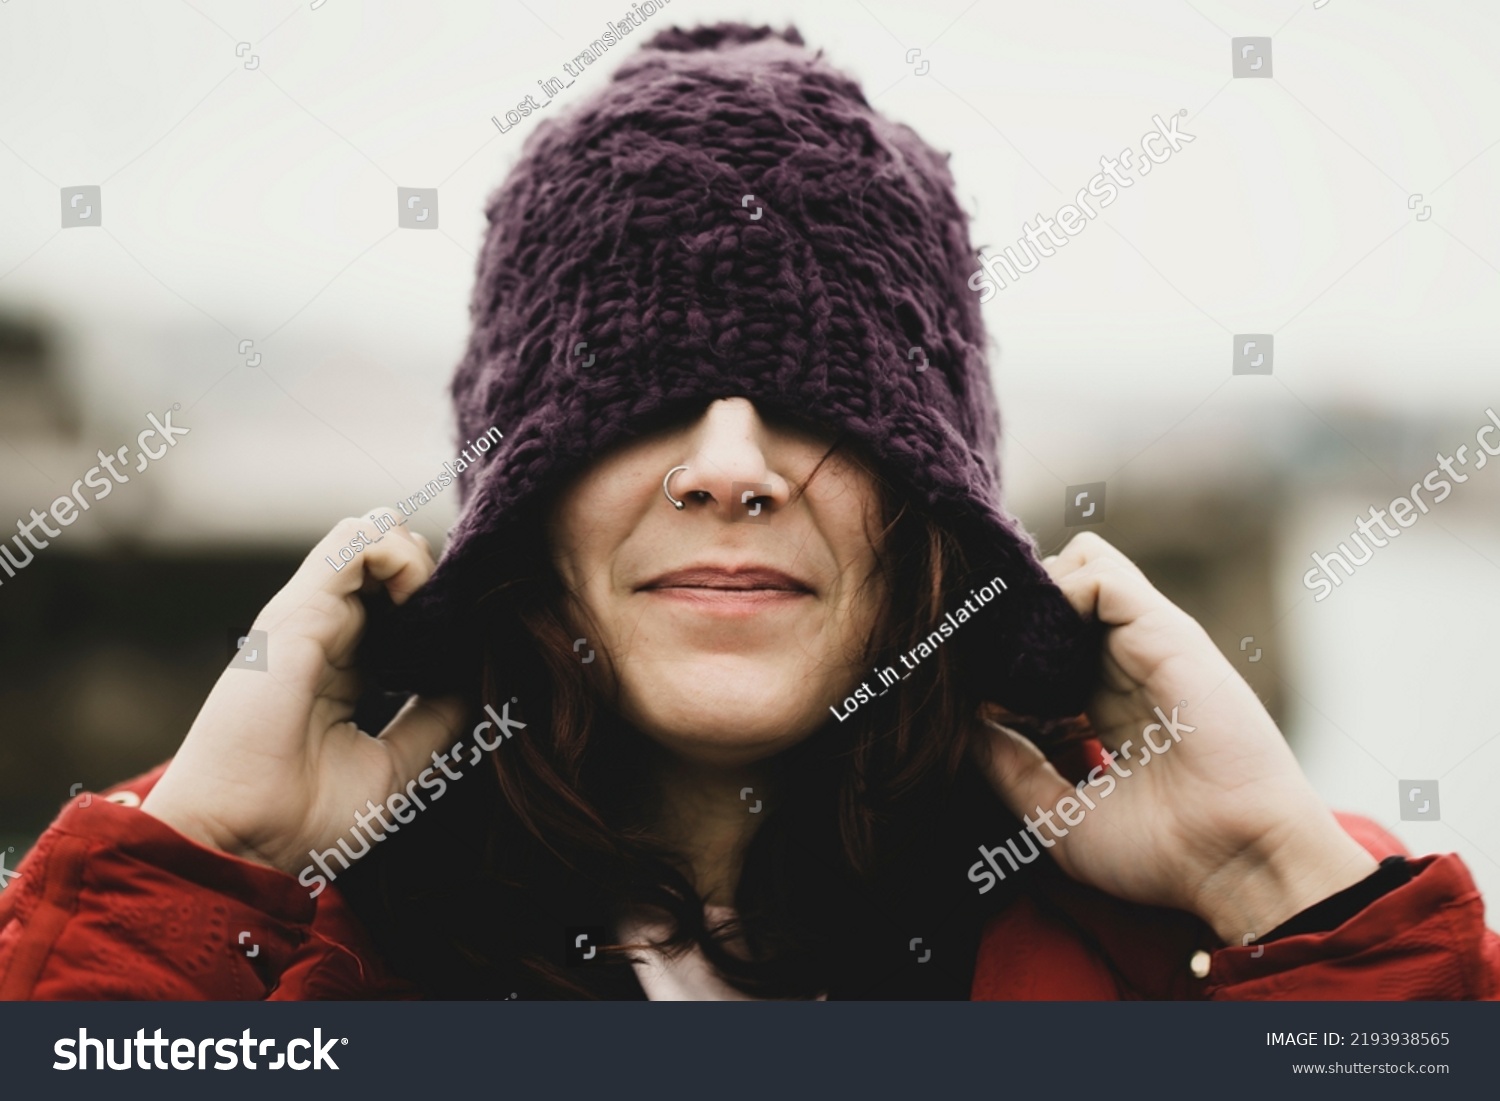 pull head wool cap autumn winter casual woman wearing wool hat outdoors hiding her eyes under fashion knitted cap. Winter wool hat and septum piercing. hat for the cold. Protect hair the cold #2193938565